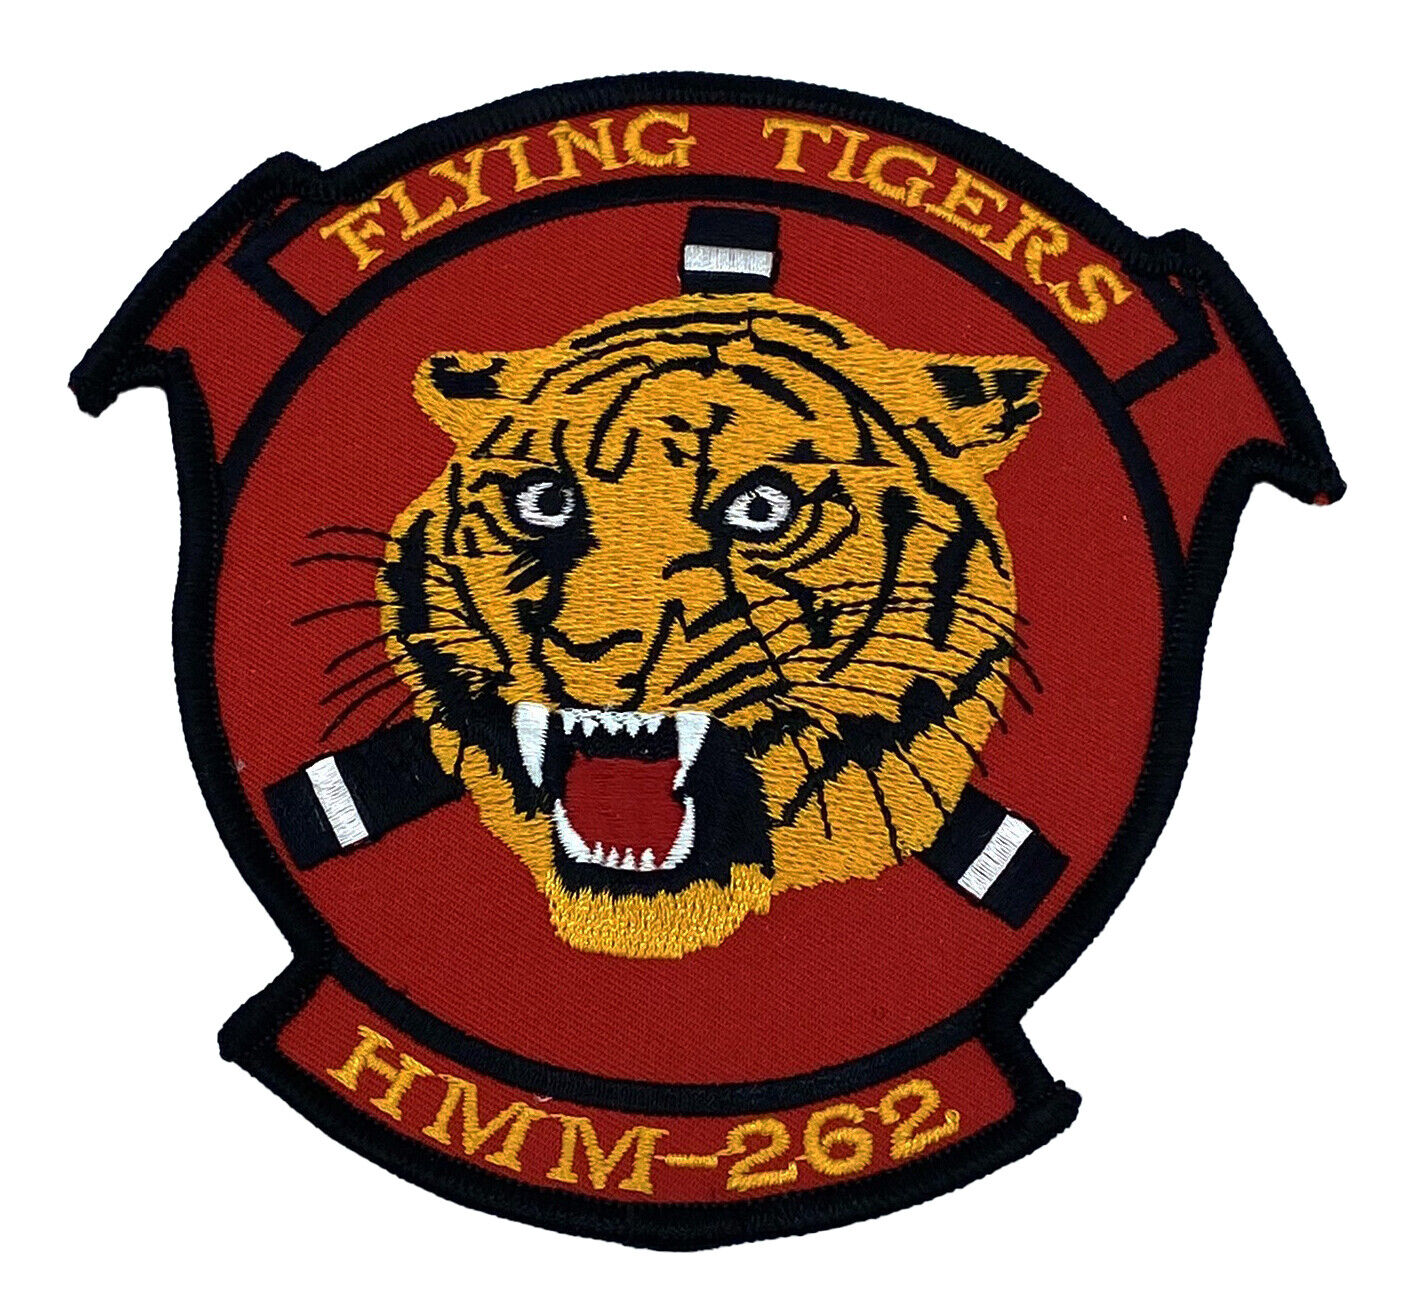 HMM-262 Flying Tigers Patch - Plastic Backing/Sew On, 4.5\